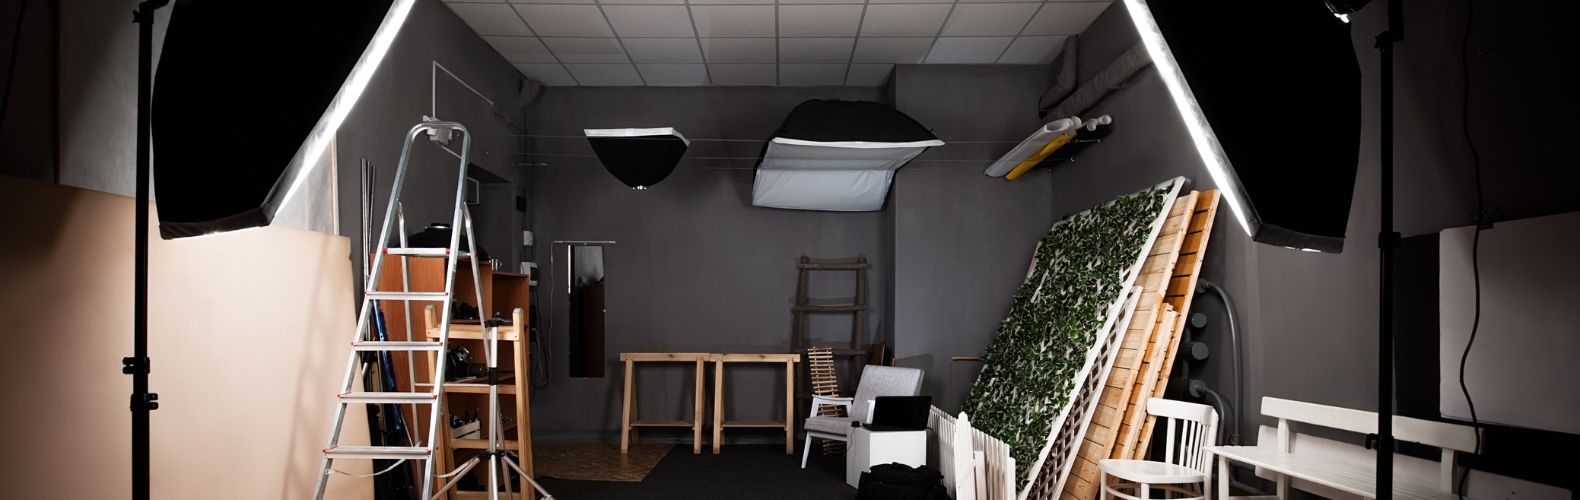 image of a photography studio backroom with various equipment such as lighting and backgrounds